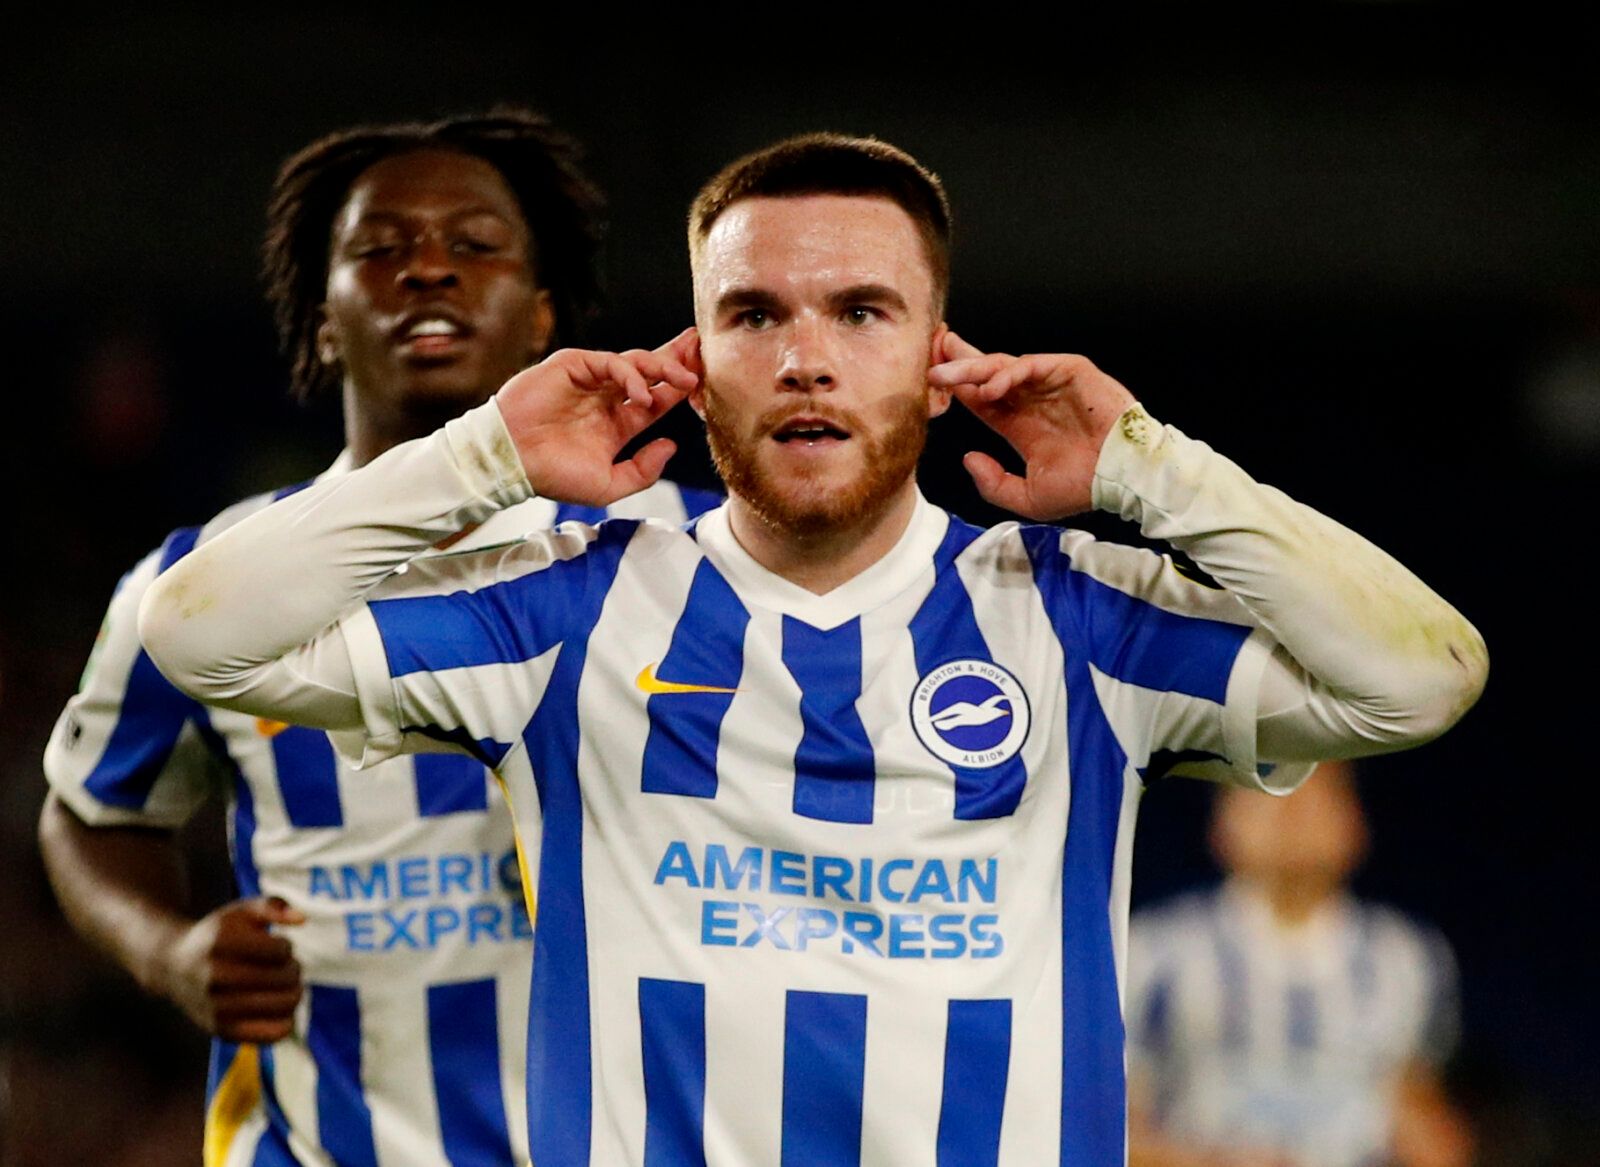 Soccer Football - Carabao Cup - Third Round - Brighton &amp; Hove Albion v Swansea City - The American Express Community Stadium, Brighton, Britain - September 22, 2021 Brighton &amp; Hove Albion's Aaron Connolly celebrates scoring their second goal Action Images via Reuters/Andrew Boyers EDITORIAL USE ONLY. No use with unauthorized audio, video, data, fixture lists, club/league logos or 'live' services. Online in-match use limited to 75 images, no video emulation. No use in betting, games or si